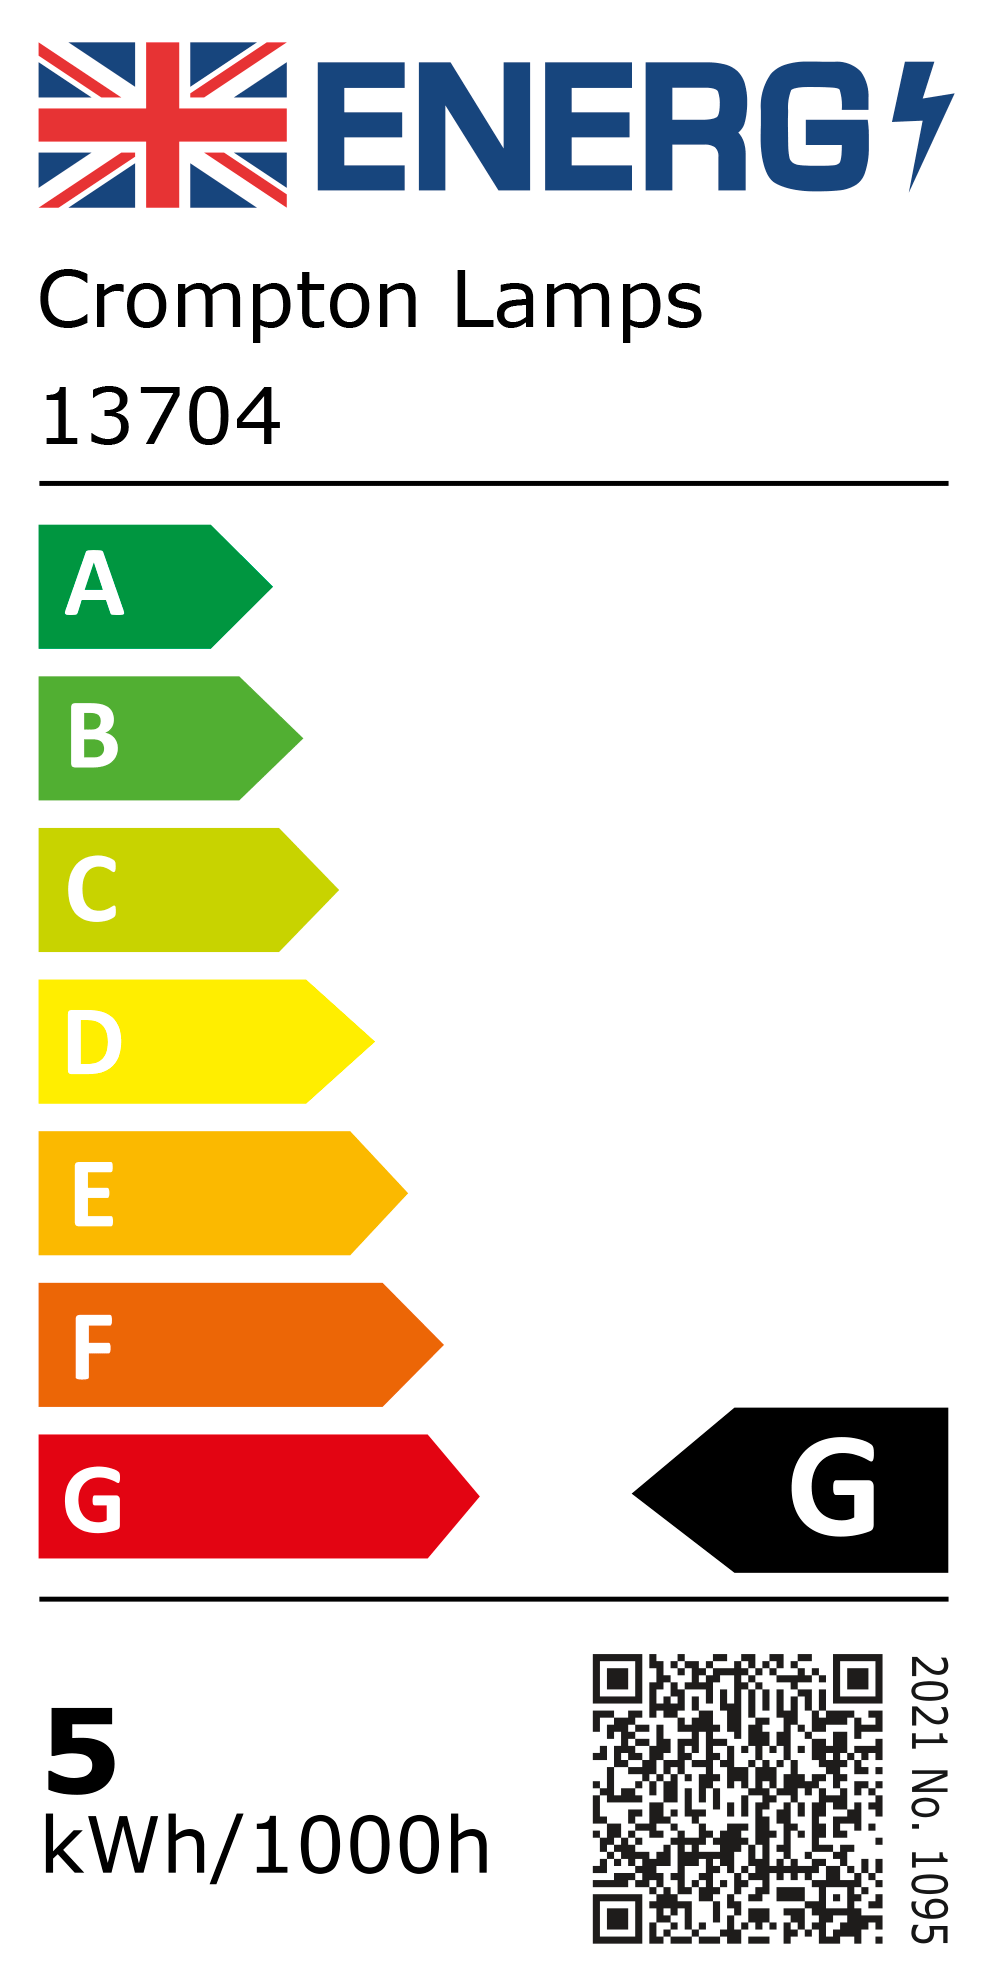 New 2021 Energy Rating Label: Stock Code 13704